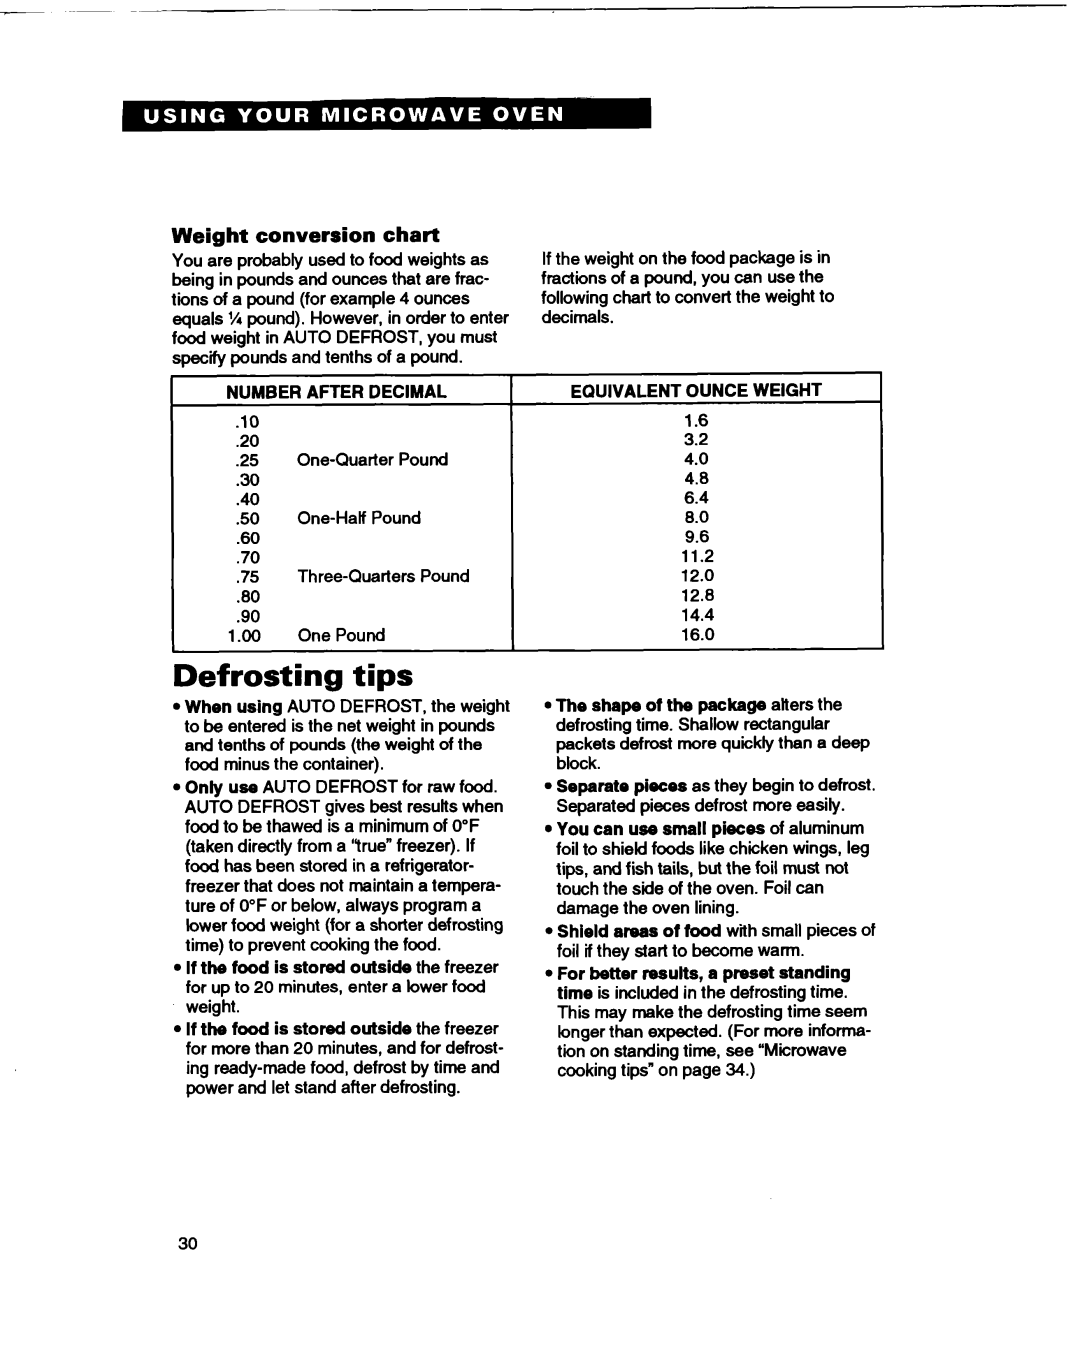 Whirlpool MT1061XB Defrosting tips, Weight conversion chart, r NUMBER AFTER DECIMAL, Equivalent Ounce Weight 